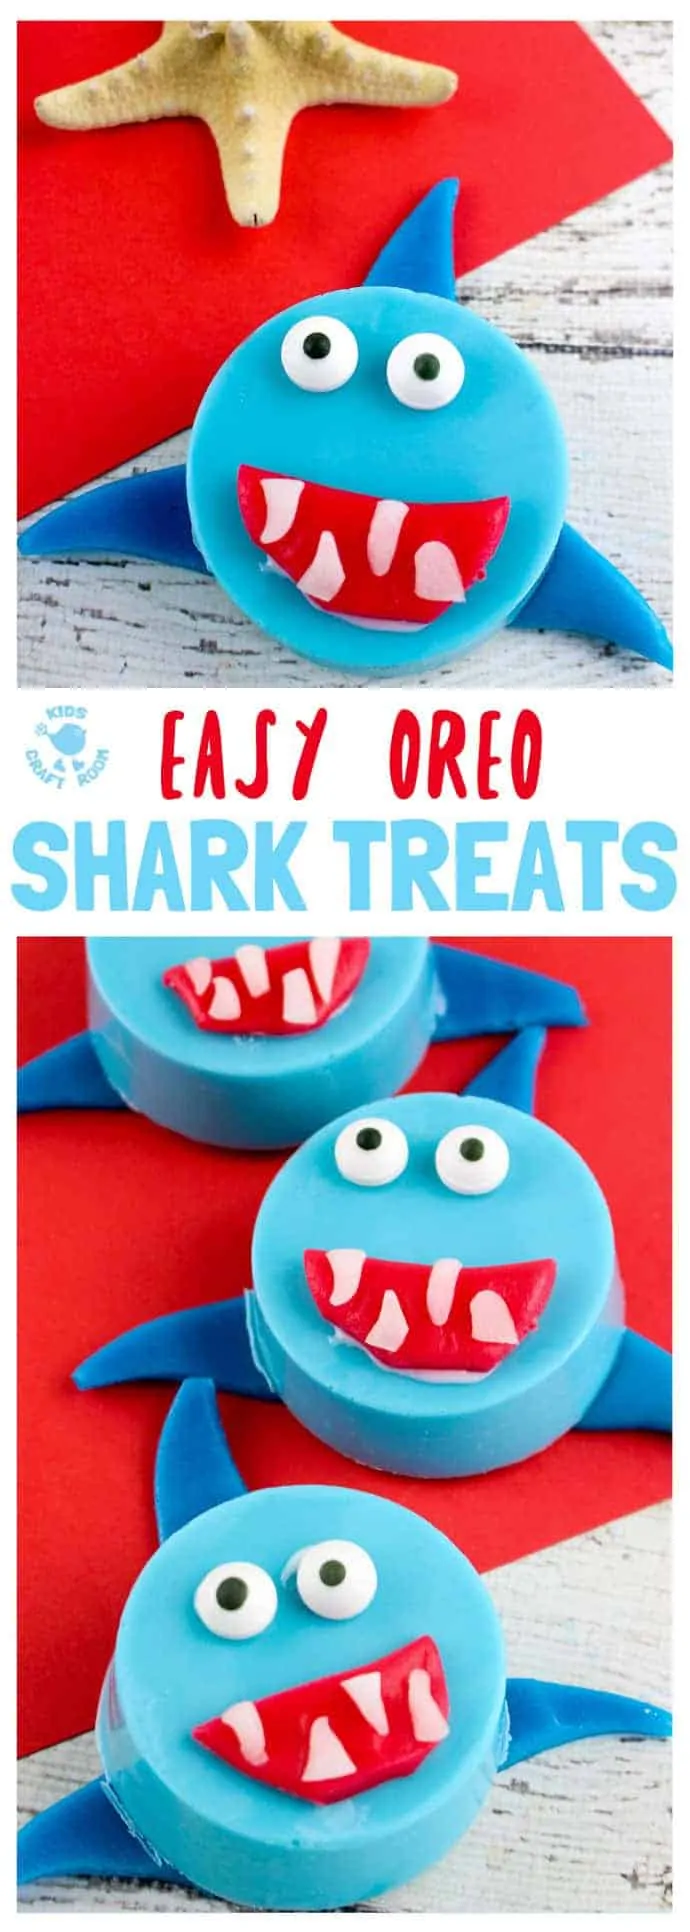 OREO SHARK TREATS are great for cooking with kids. A fin-tastic Summer activity perfect for shark week and ocean themes. Shark Cookies taste delicious and look adorable! #cookingwithkids #kidsrecipes #kidsinthekitchen #desserts #oreos #cookies #biscuits #sharks #kidscraftroom #sharkweek #sharkactivities